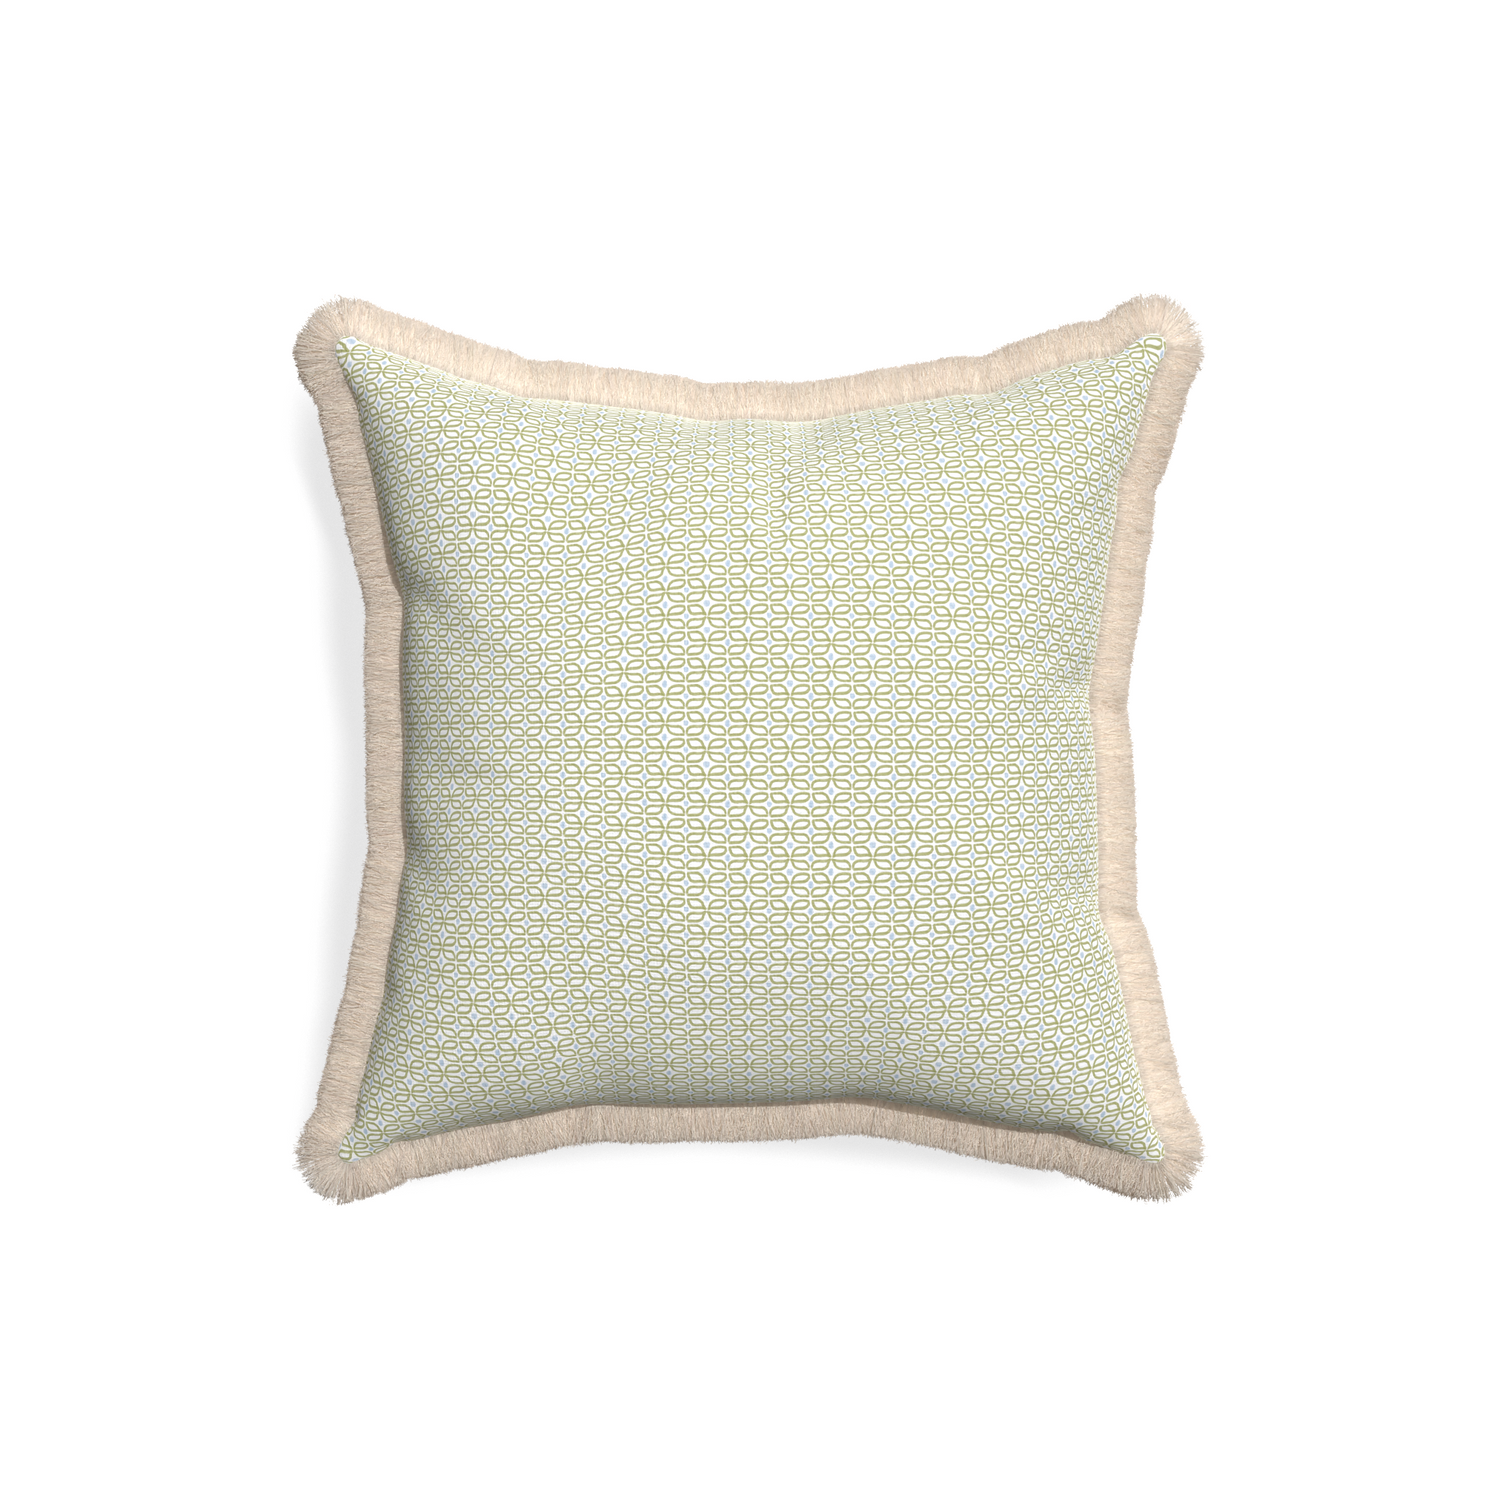 18-square loomi moss custom pillow with cream fringe on white background